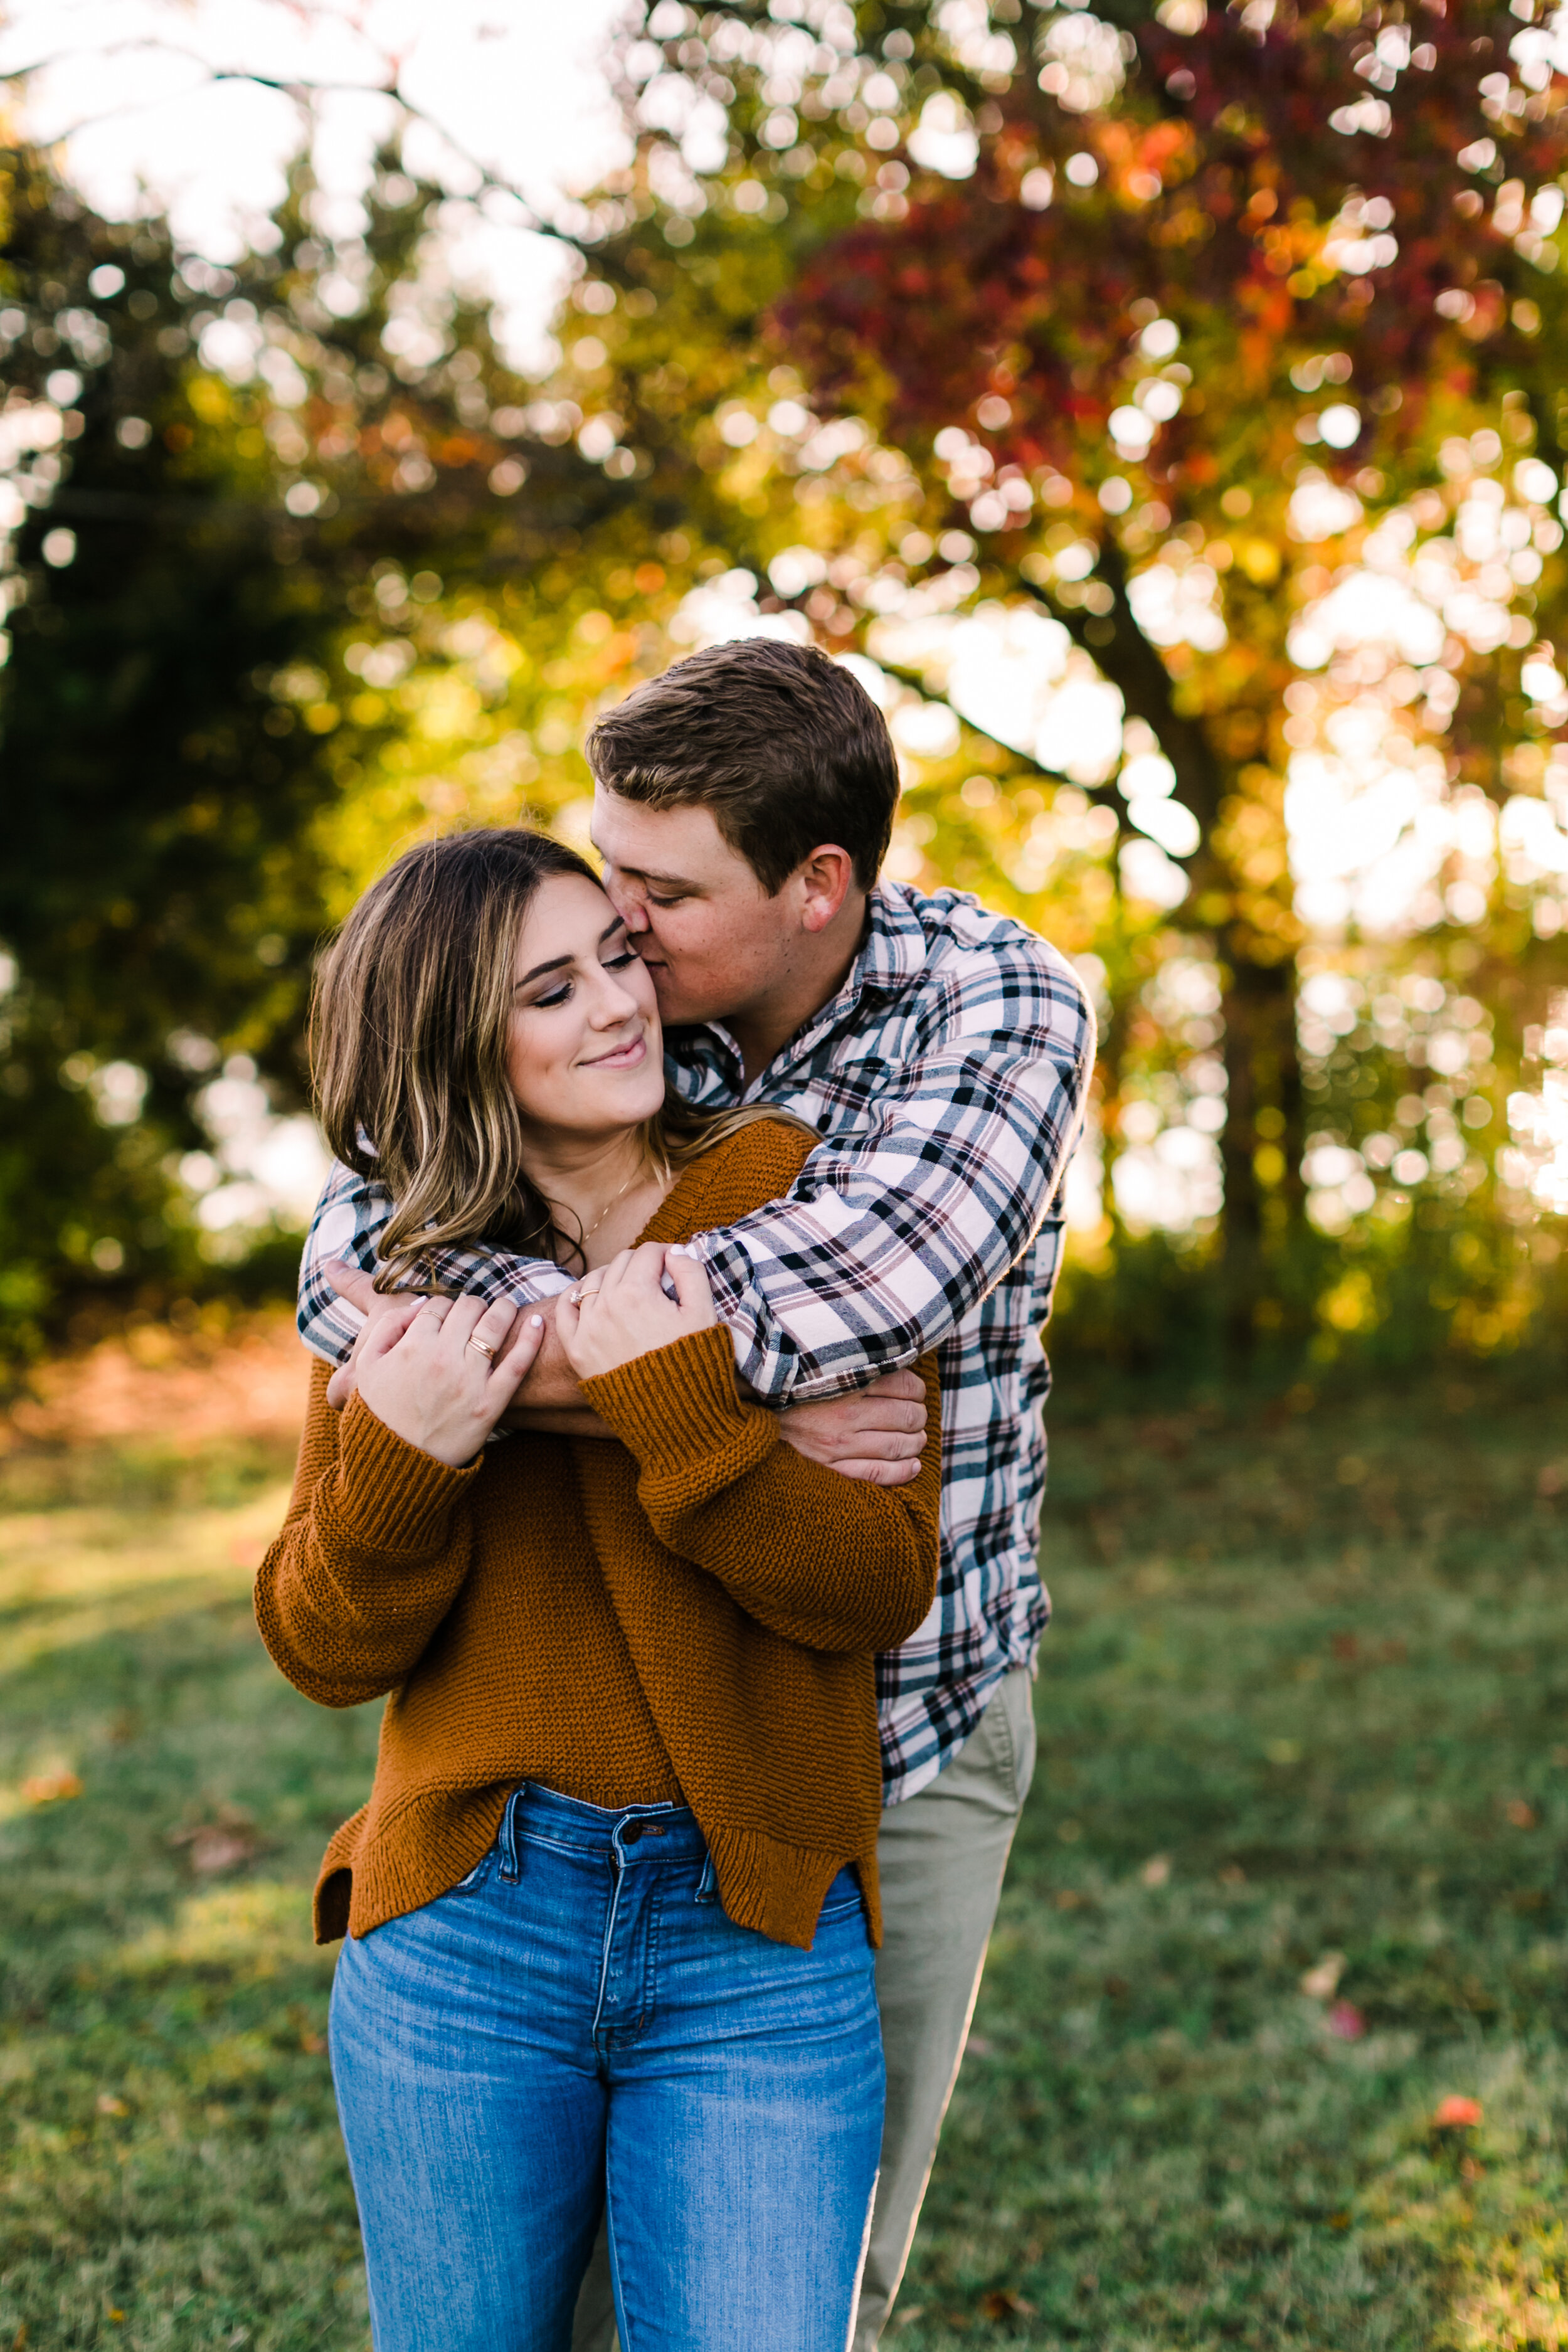 Tennessee+Fall+Engagement+Photos+Puppy (38 of 63).jpg